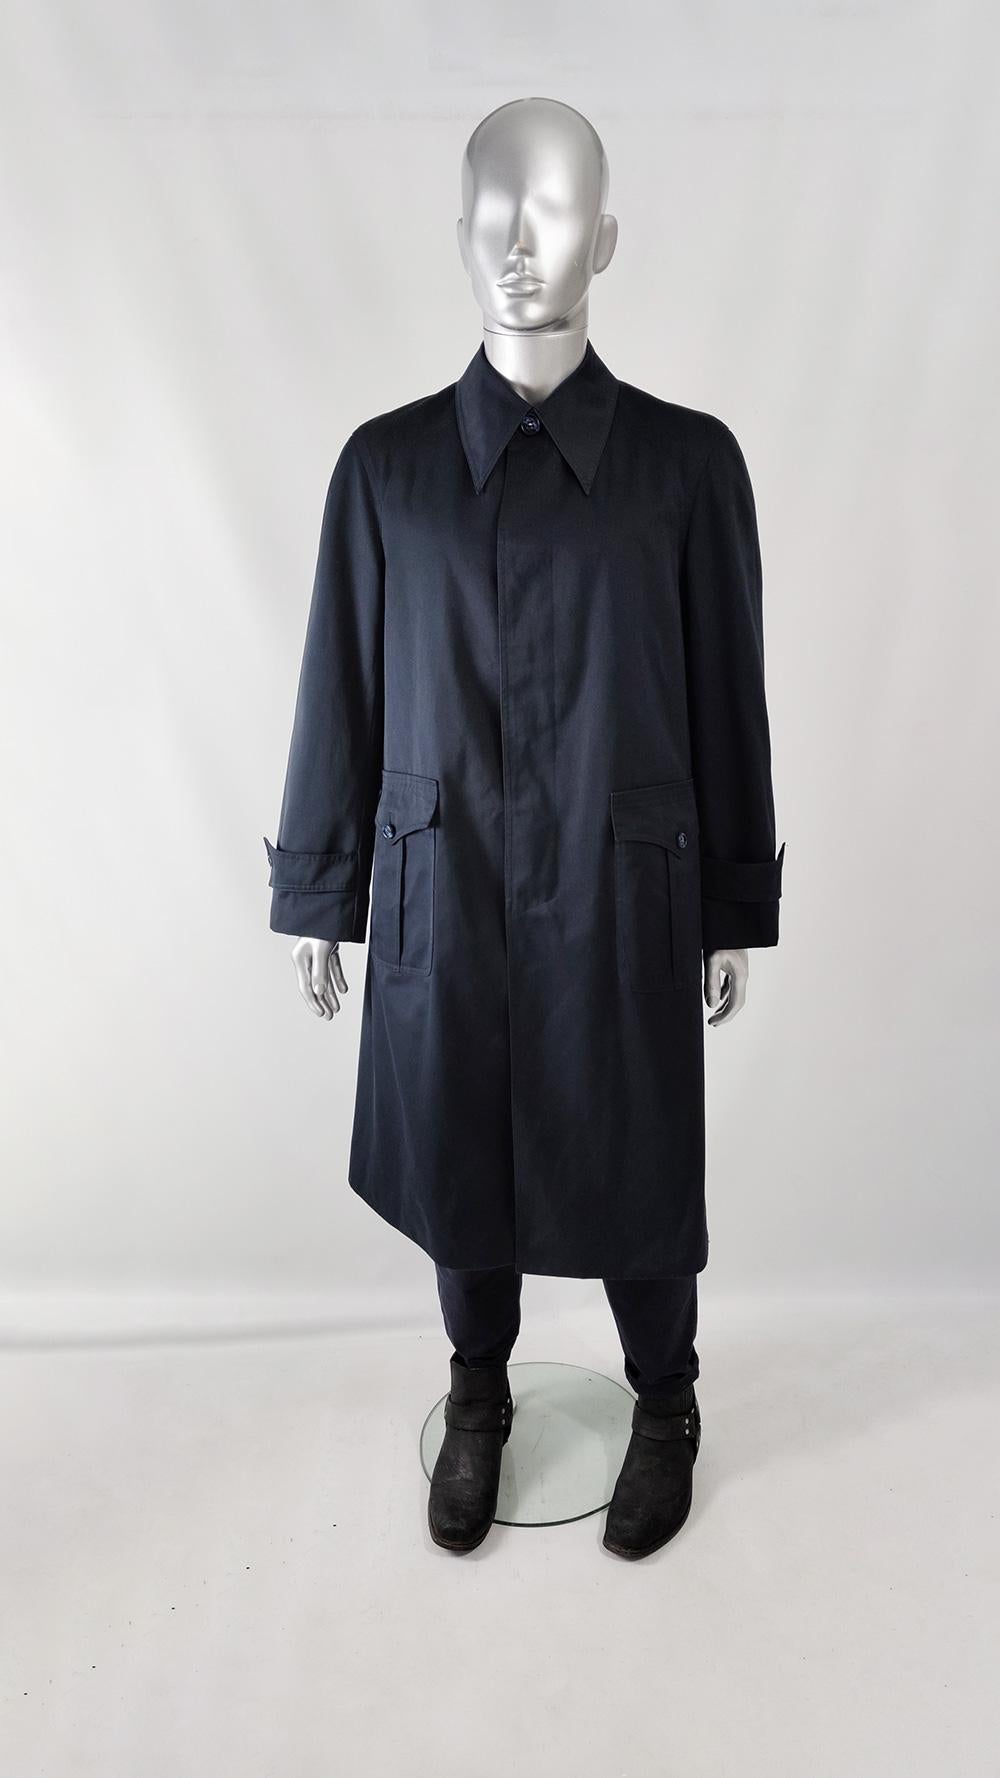 An excellent and rare vintage mens coat from the 70s by luxury French label, Jupiter of Paris. In a navy blue fabric with an extended dagger collar, roomy, oversized fit on the body that flares our from the waist to hem, pleated flap patch pockets